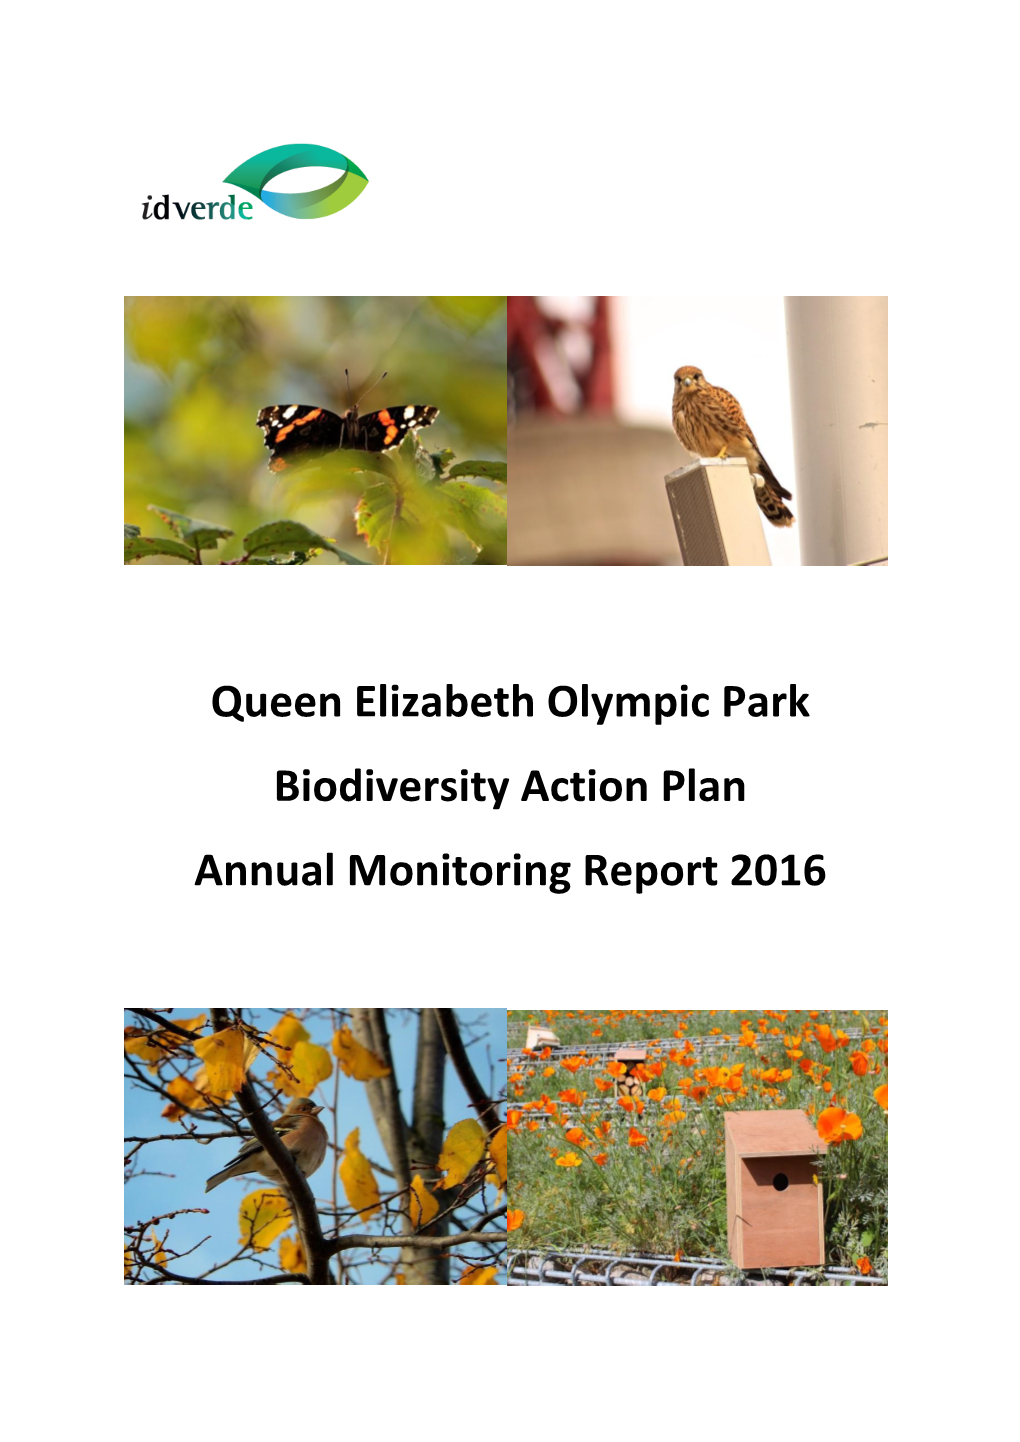 Queen Elizabeth Olympic Park Biodiversity Action Plan Annual Monitoring Report 2016